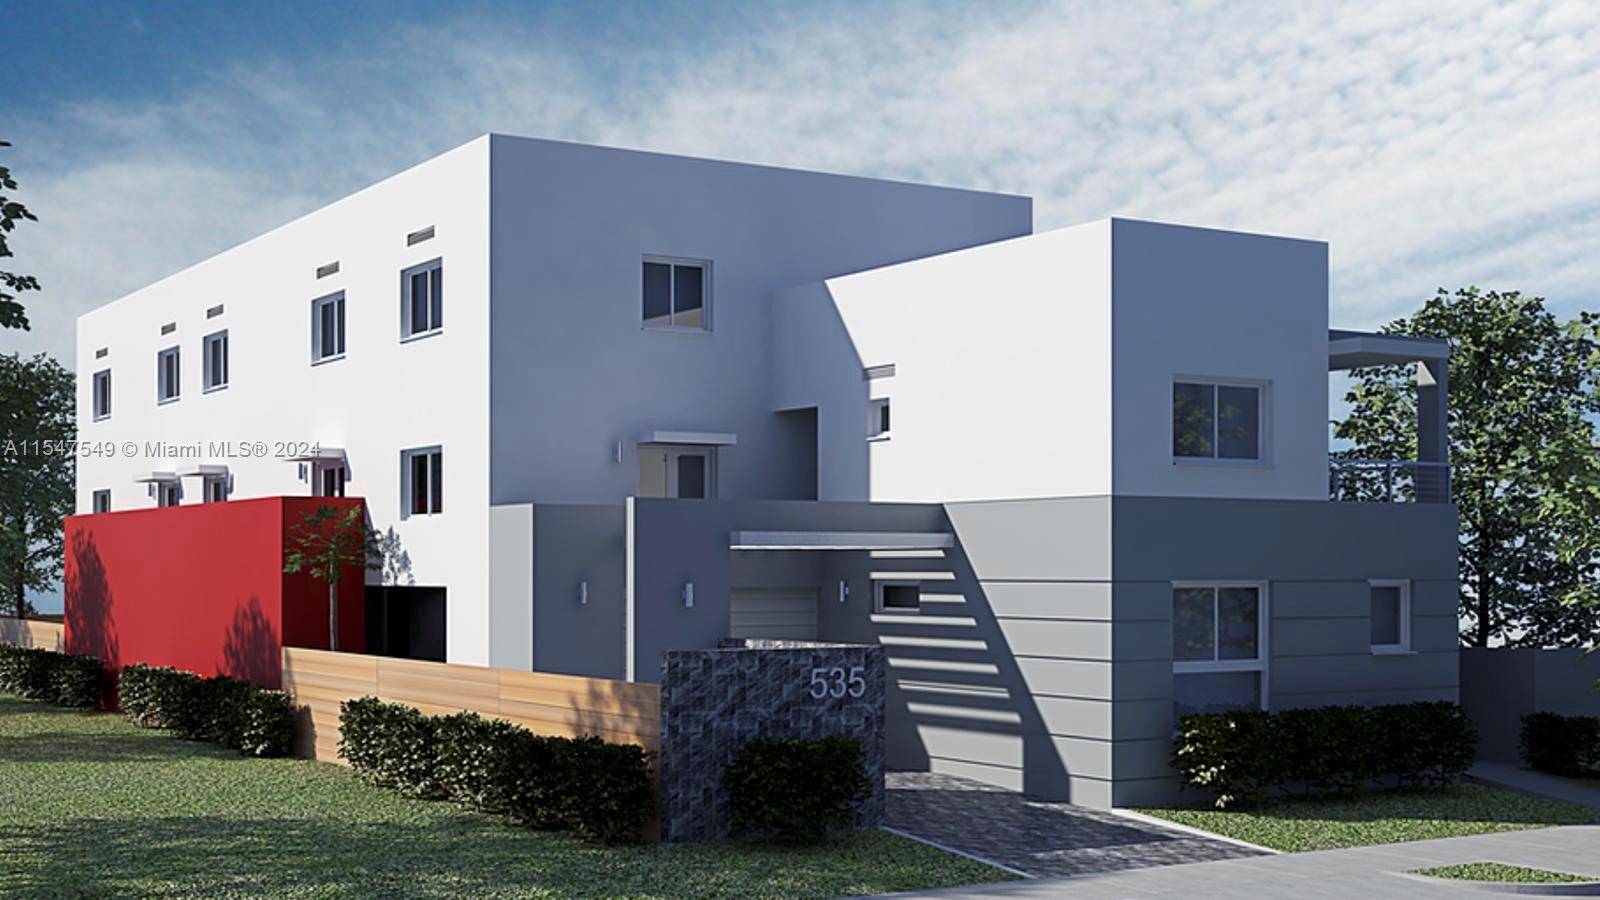 NEW CONSTRUCTION ! ! ! Modern 2 2 DUPLEX in the heart of LITTLE HAVANA, just few minutes away from BRICKELL and DOWNTOWN !